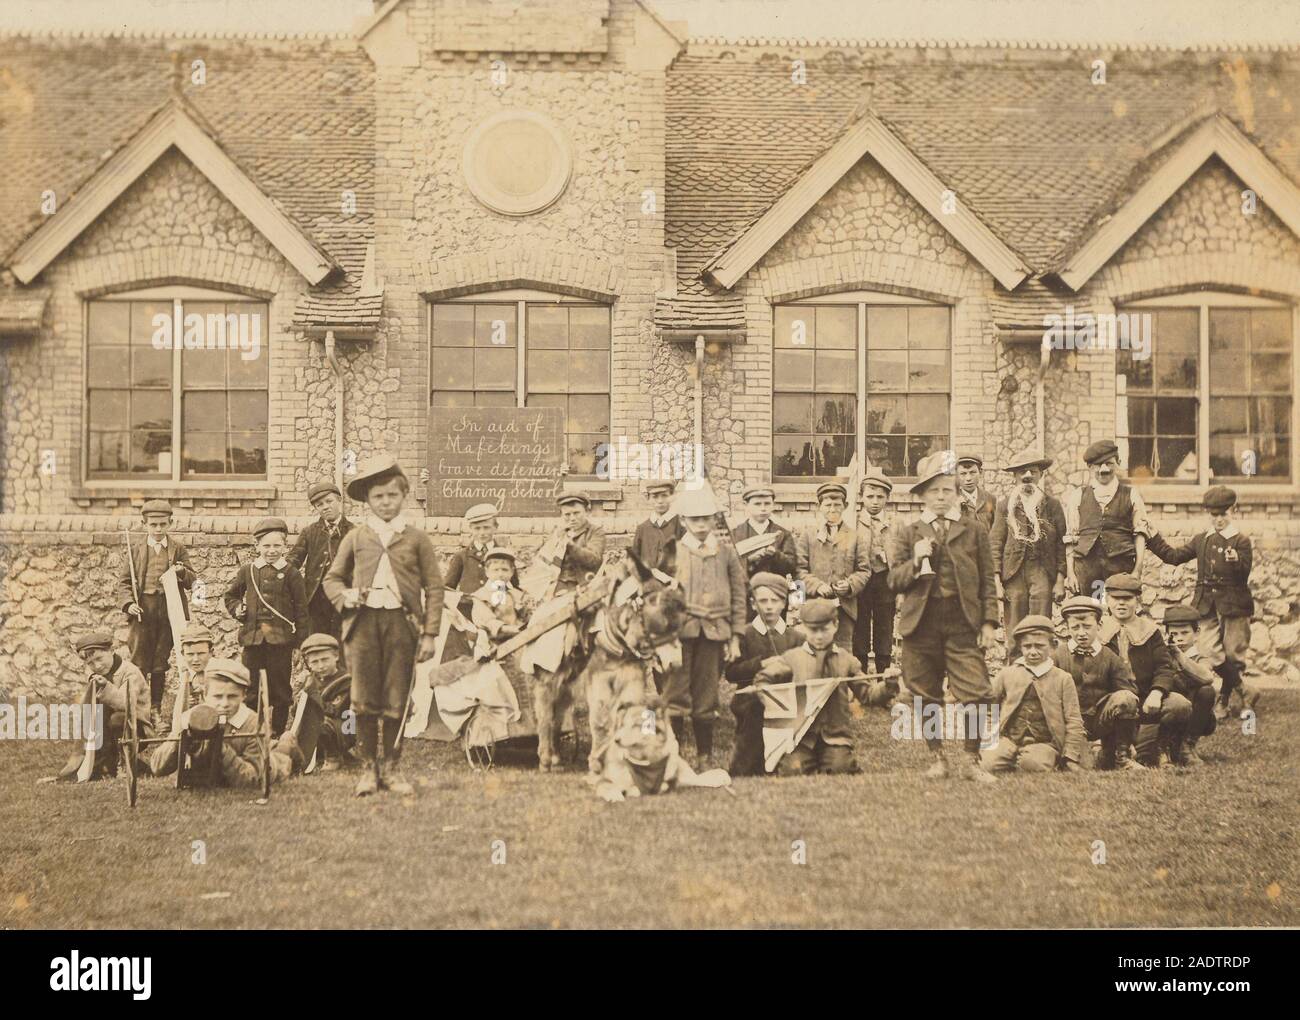 Historical archive image of children from Charing School in Kent taking part in a fundraising event for the Mafeking Fund, during the Boer War Stock Photo